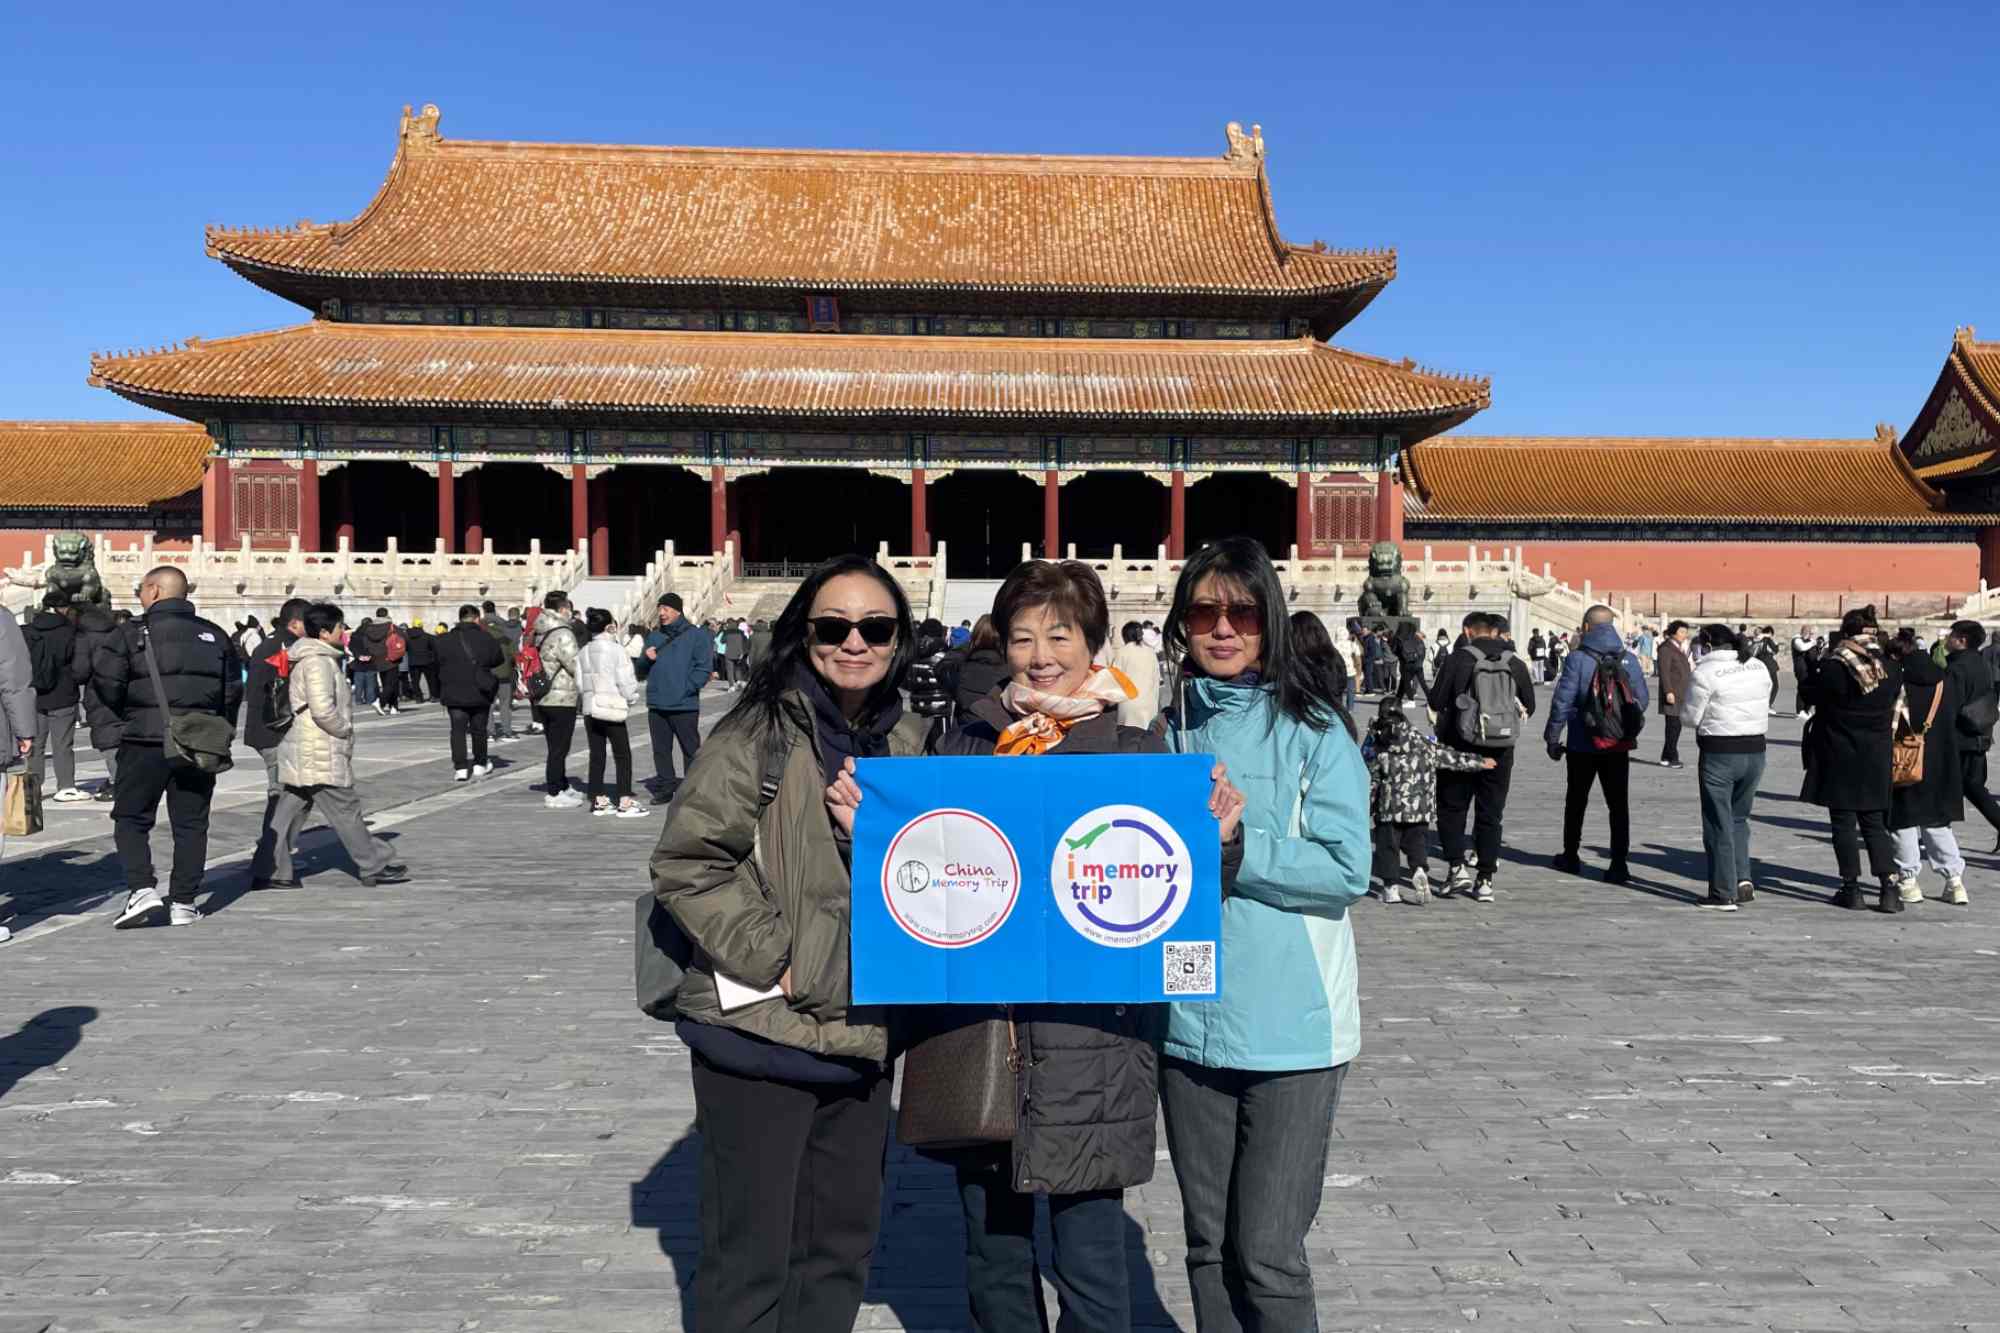 We will arrange a professional guide as well as a driver to accompany you on this 5-day tour. Visit top attractions, including UNESCO World Heritage Sites such as the Great Wall of China, Forbidden City, Summer Palace and Temple of Heaven. Come for a walk